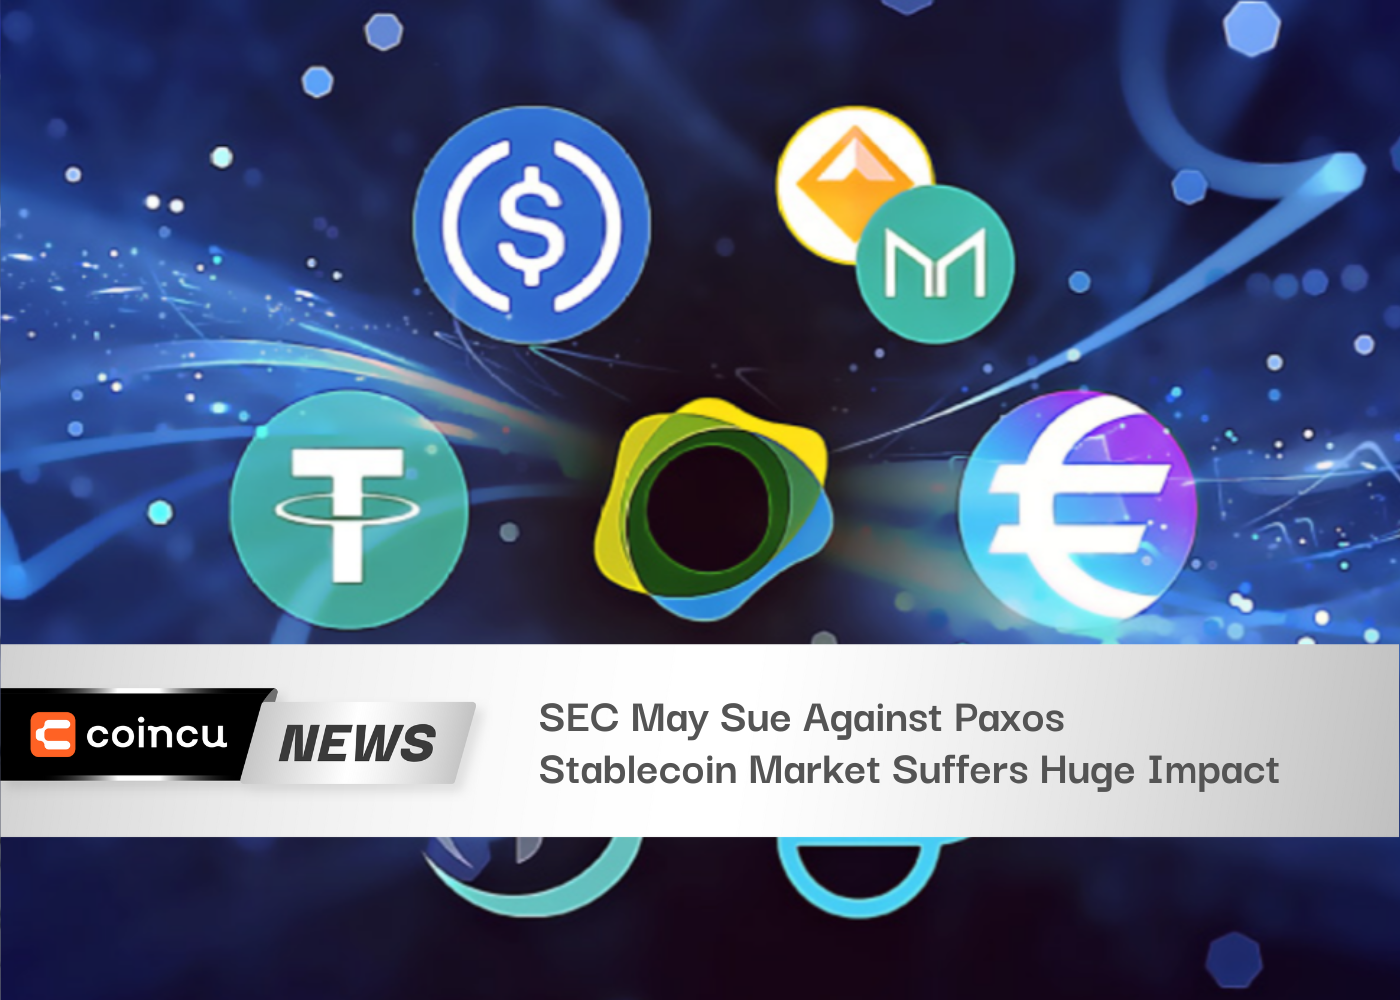 SEC May Sue Against Paxos, Stablecoin Market Suffers Huge Impact